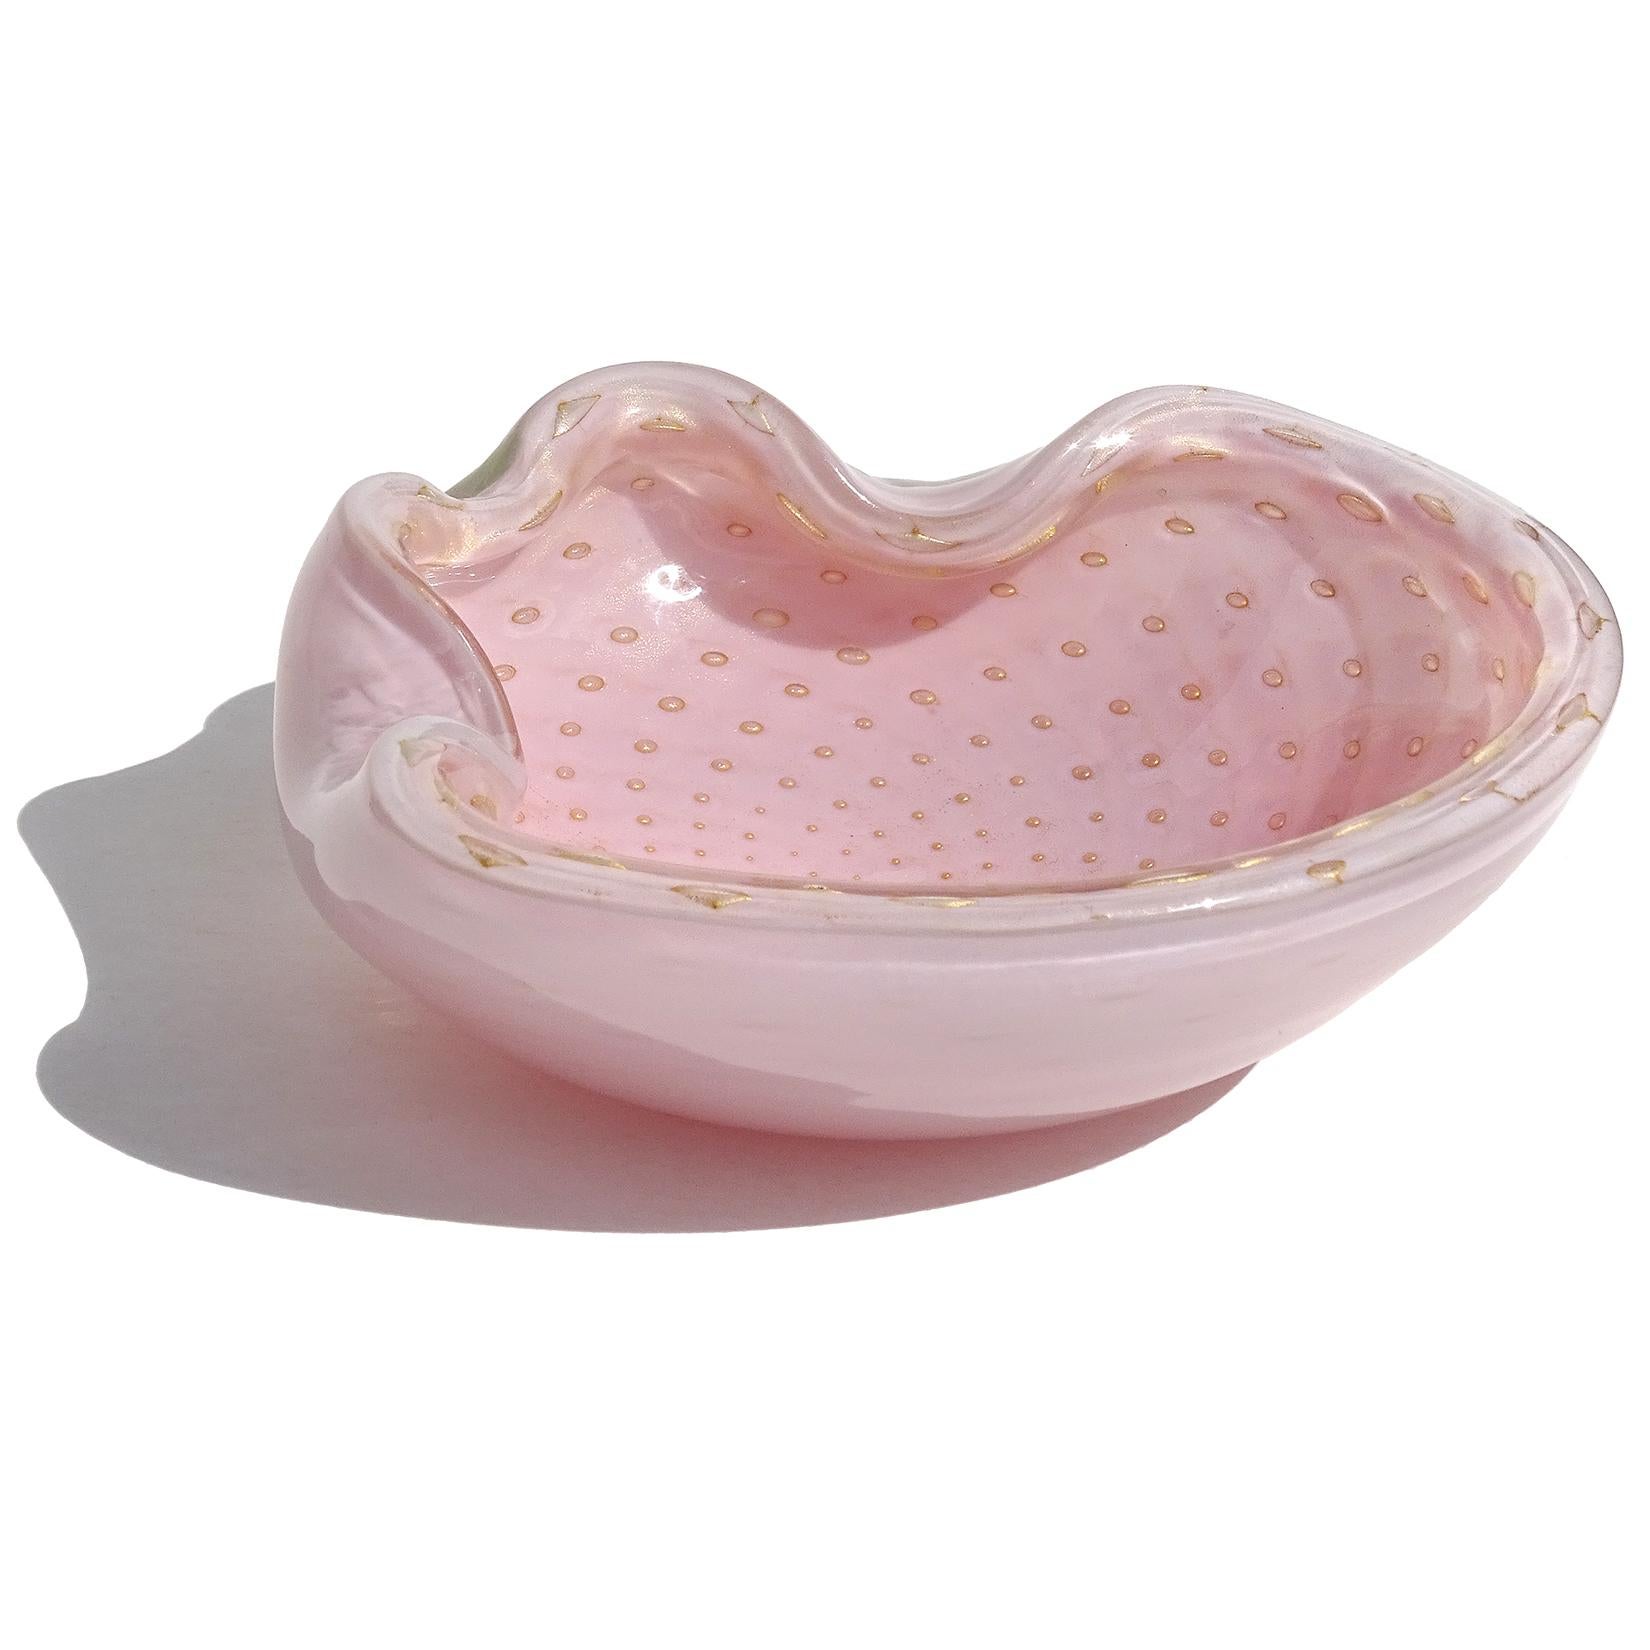 Beautiful vintage Murano hand blown pink, controlled bubbles, and gold flecks Italian art glass decorative bowl / ashtray. Documented to designer Alfredo Barbini, circa 1950s. Profusely covered in gold leaf, with the gold clinging to each of the